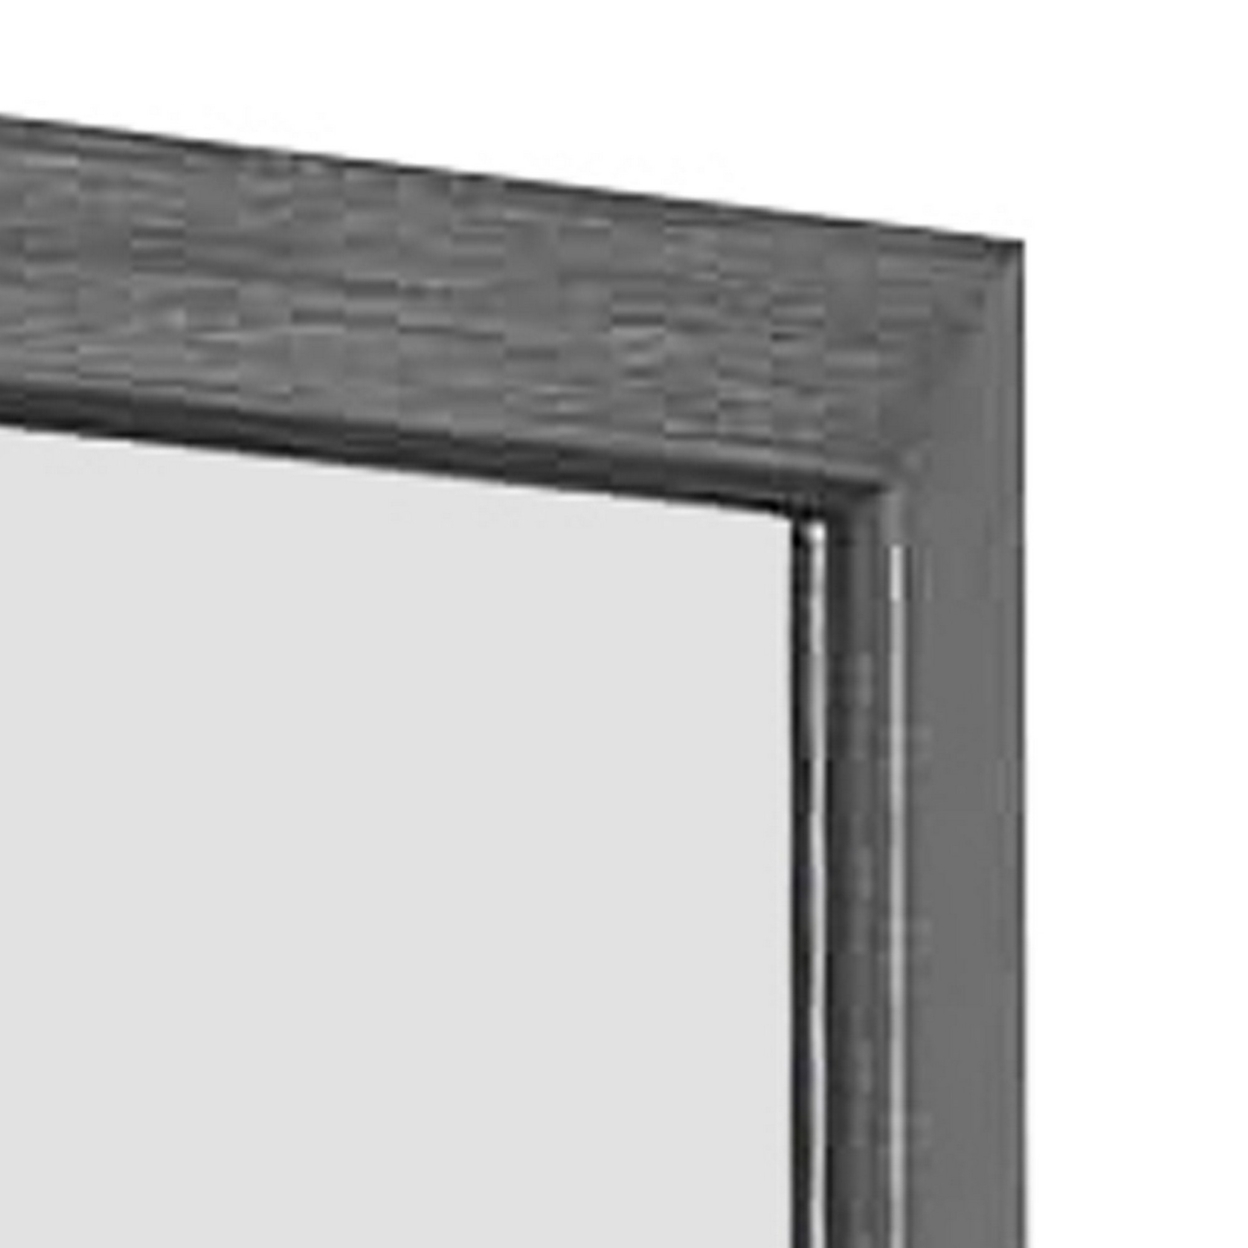 Transitional Style Wooden Frame Mirror With Grain Details, Gray- Saltoro Sherpi